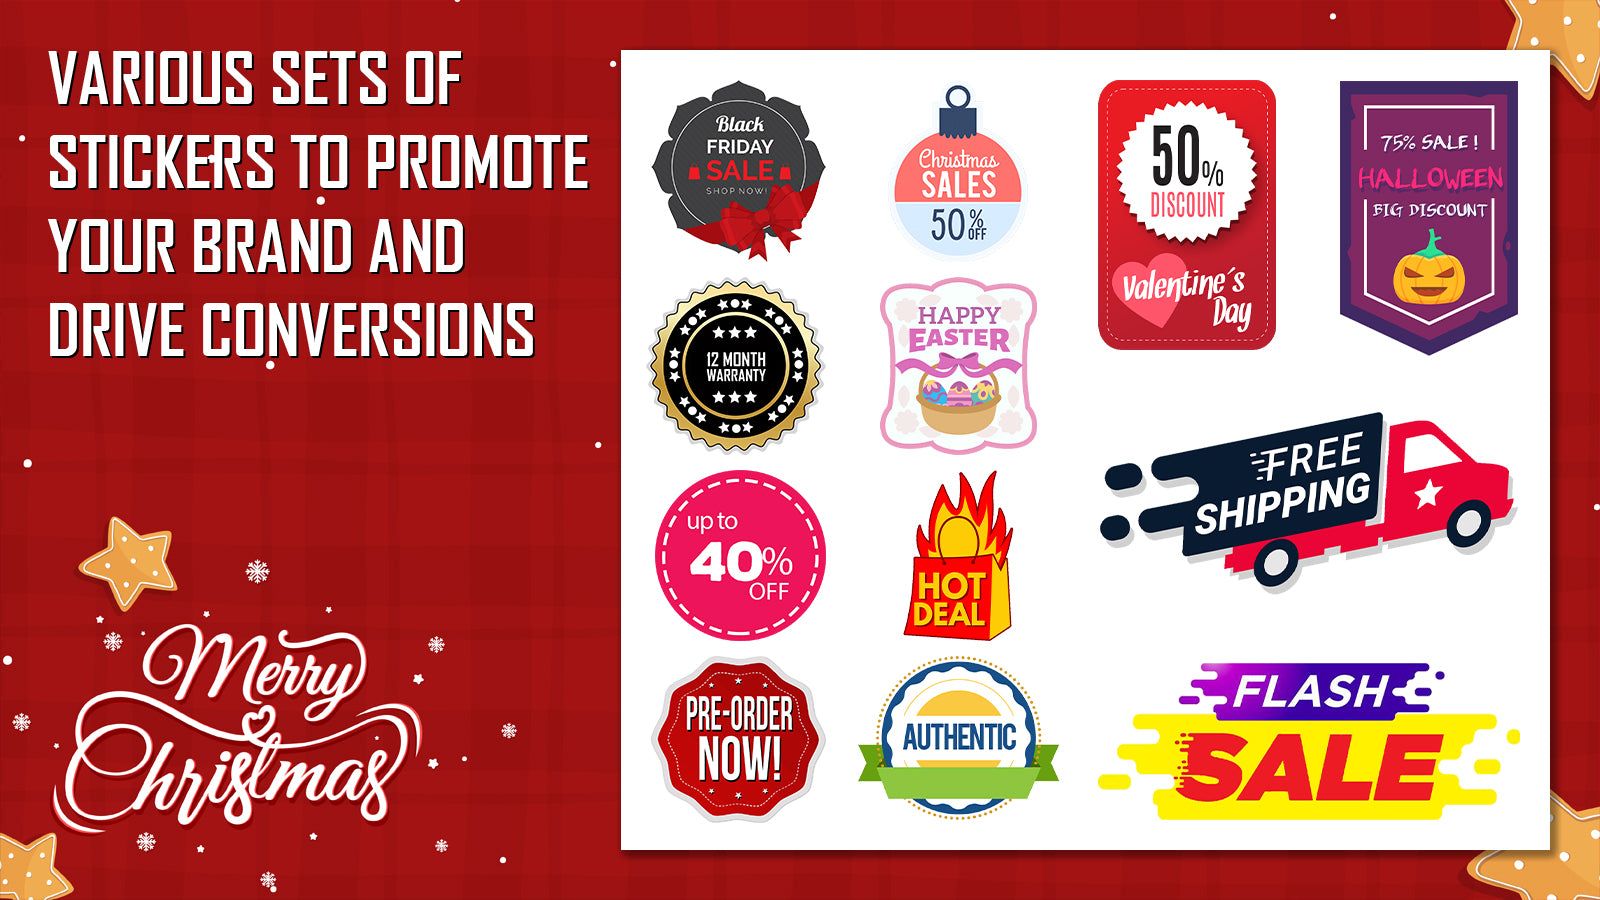 3000+ Stickers to promote your brand and drive conversion